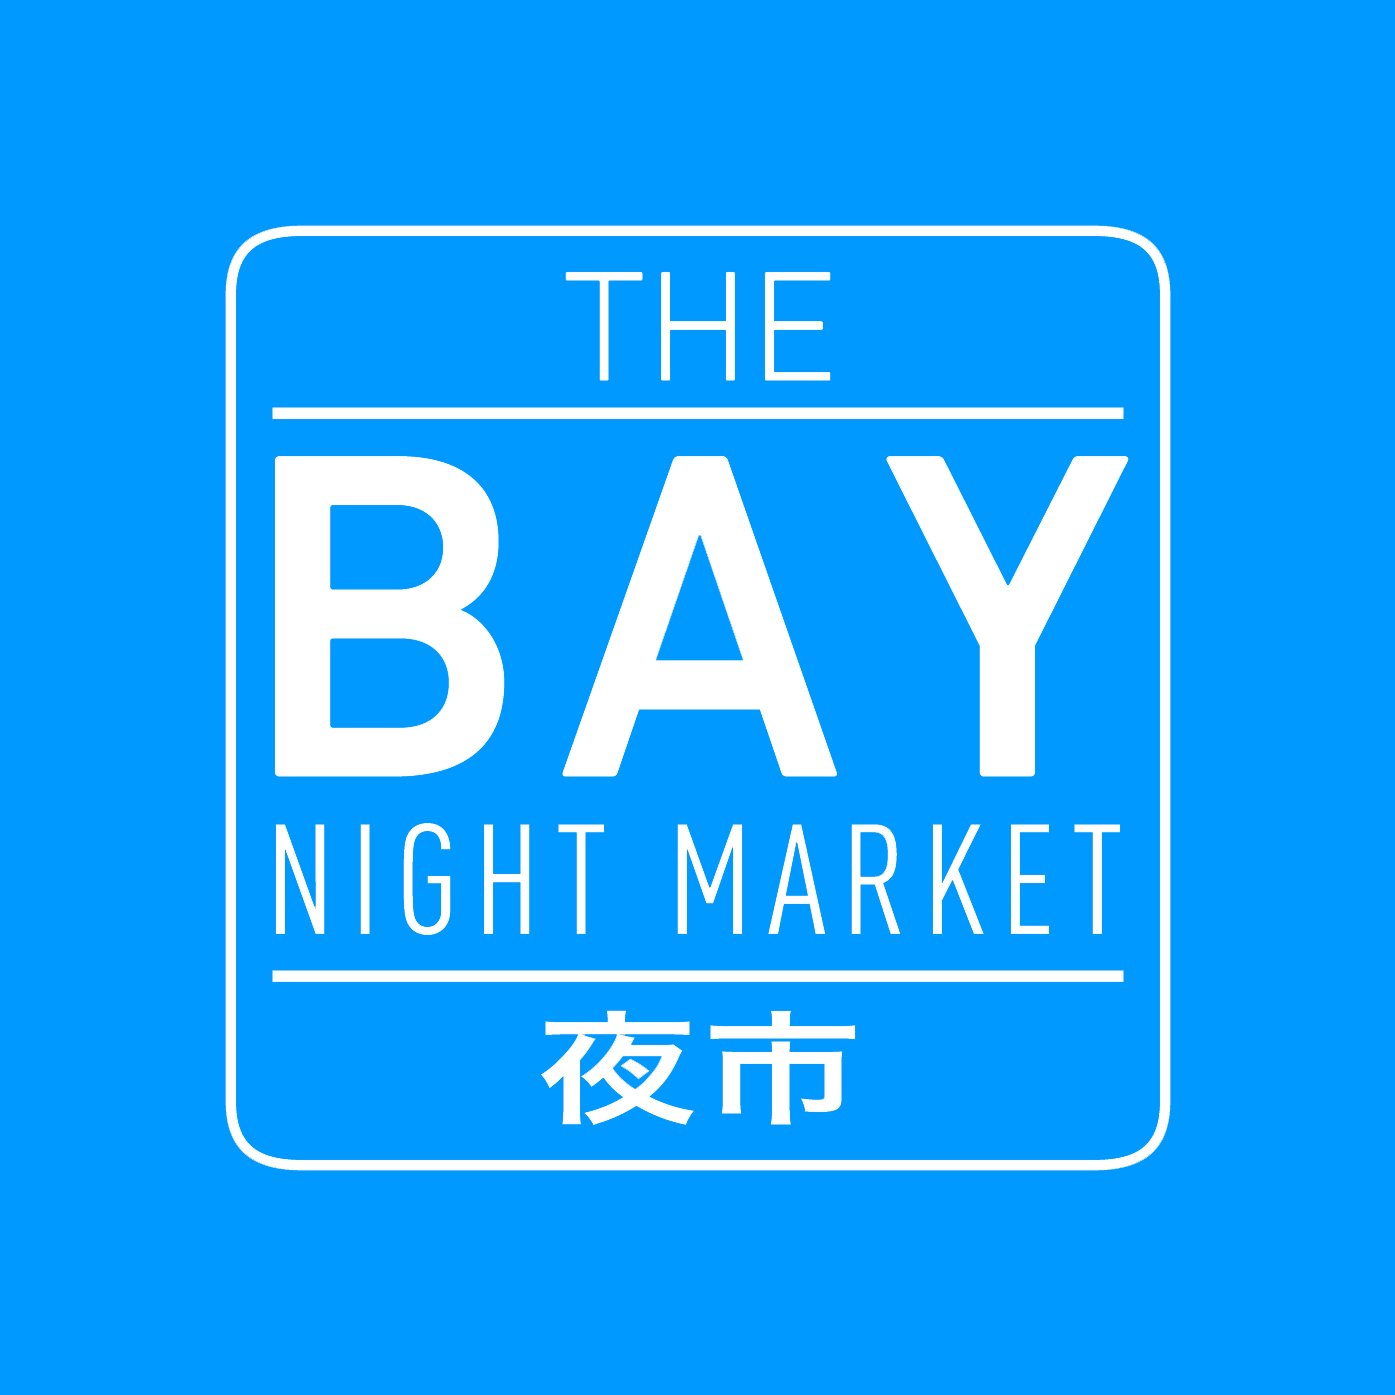 Produced by the largest and original night market in the U.S. Flagship @626NightMarket in Arcadia, CA. Coming Summer 2018!